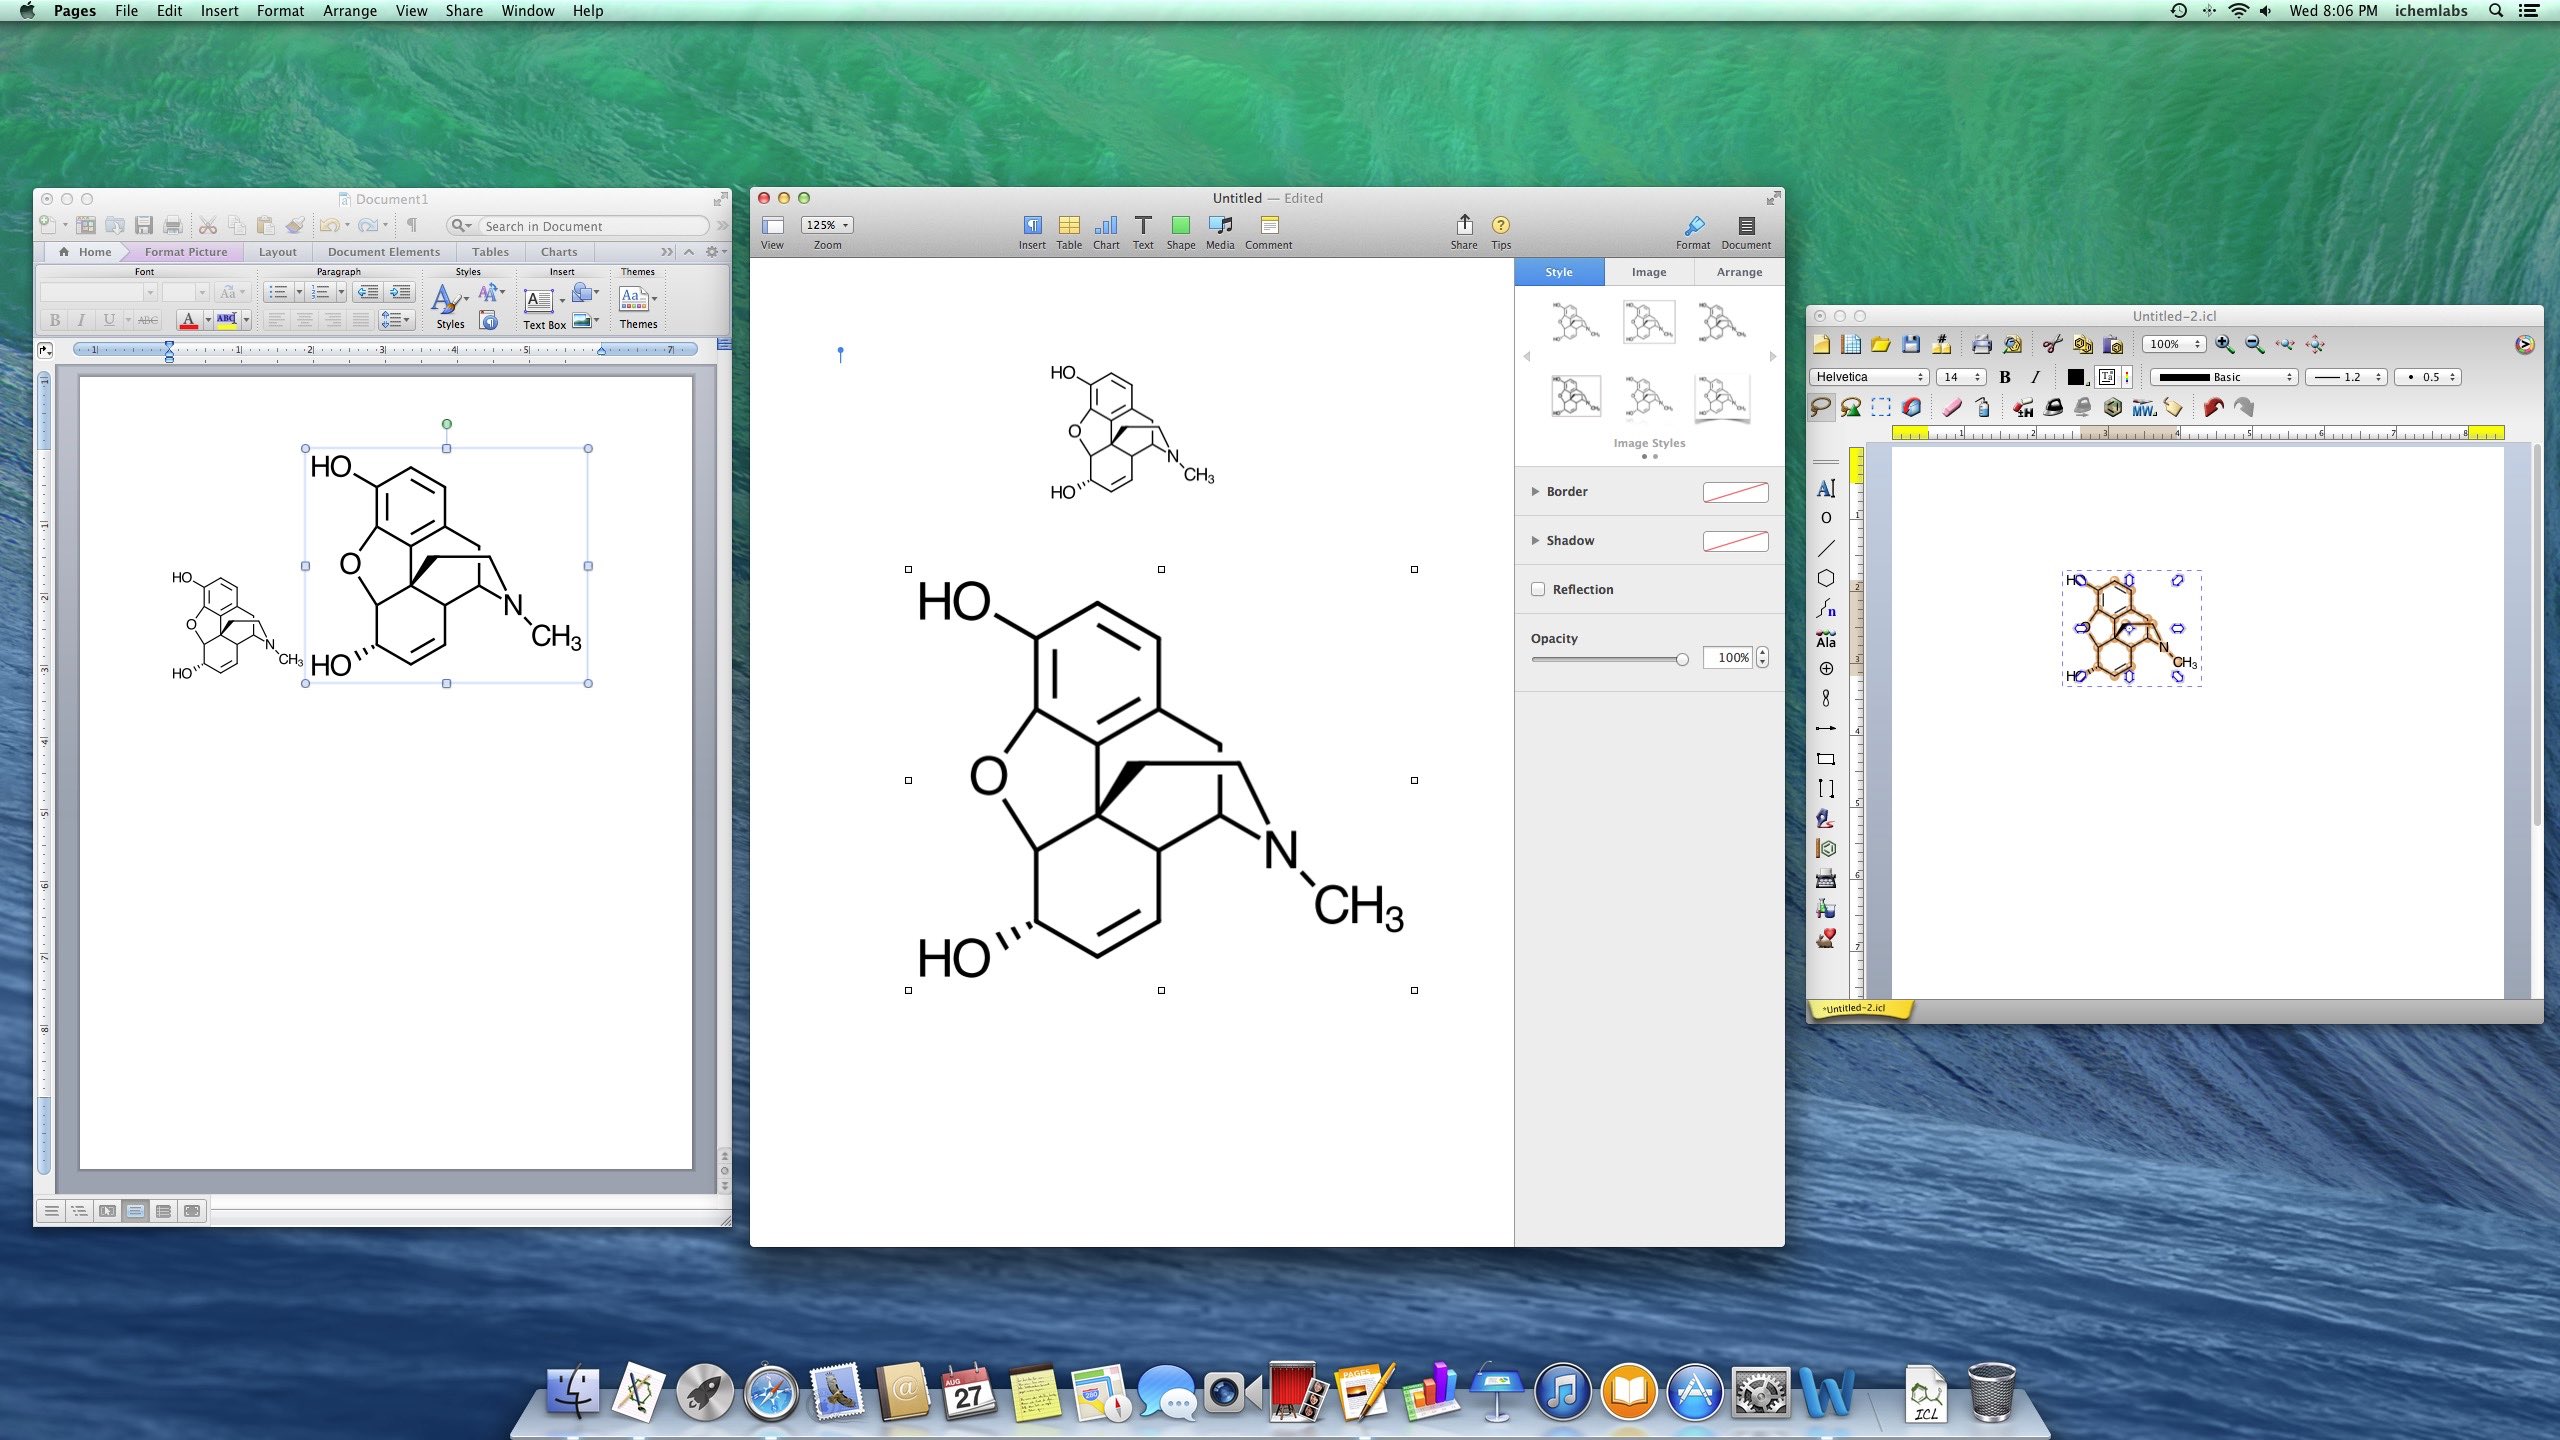 chemdoodle online